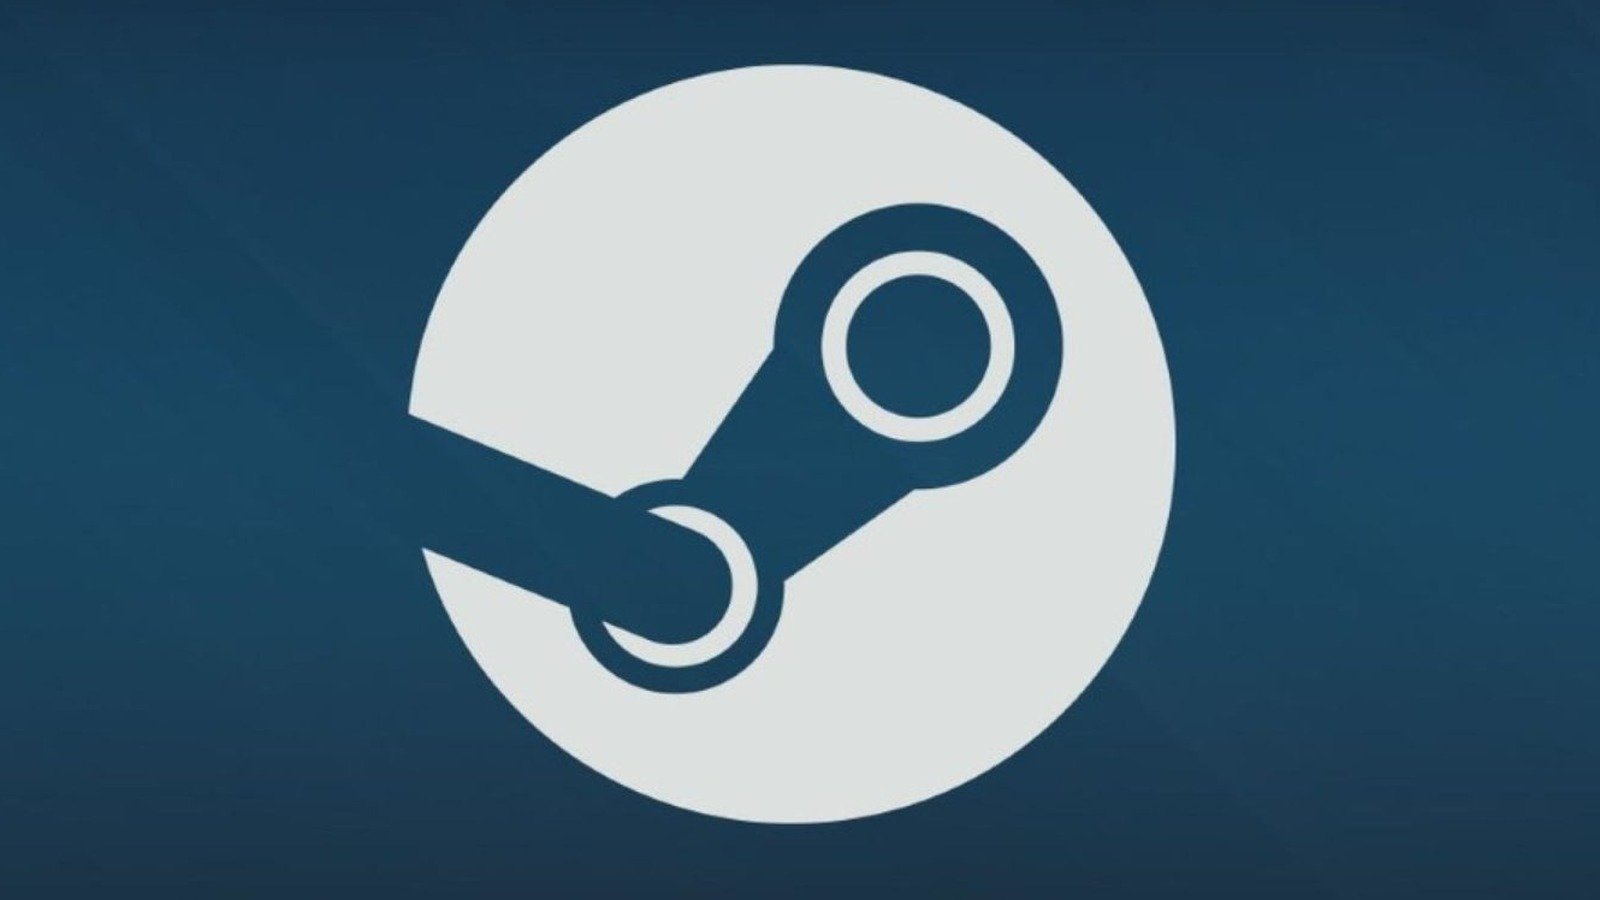 The Tricky Way Some Steam Users Are Spreading Viruses - SVG